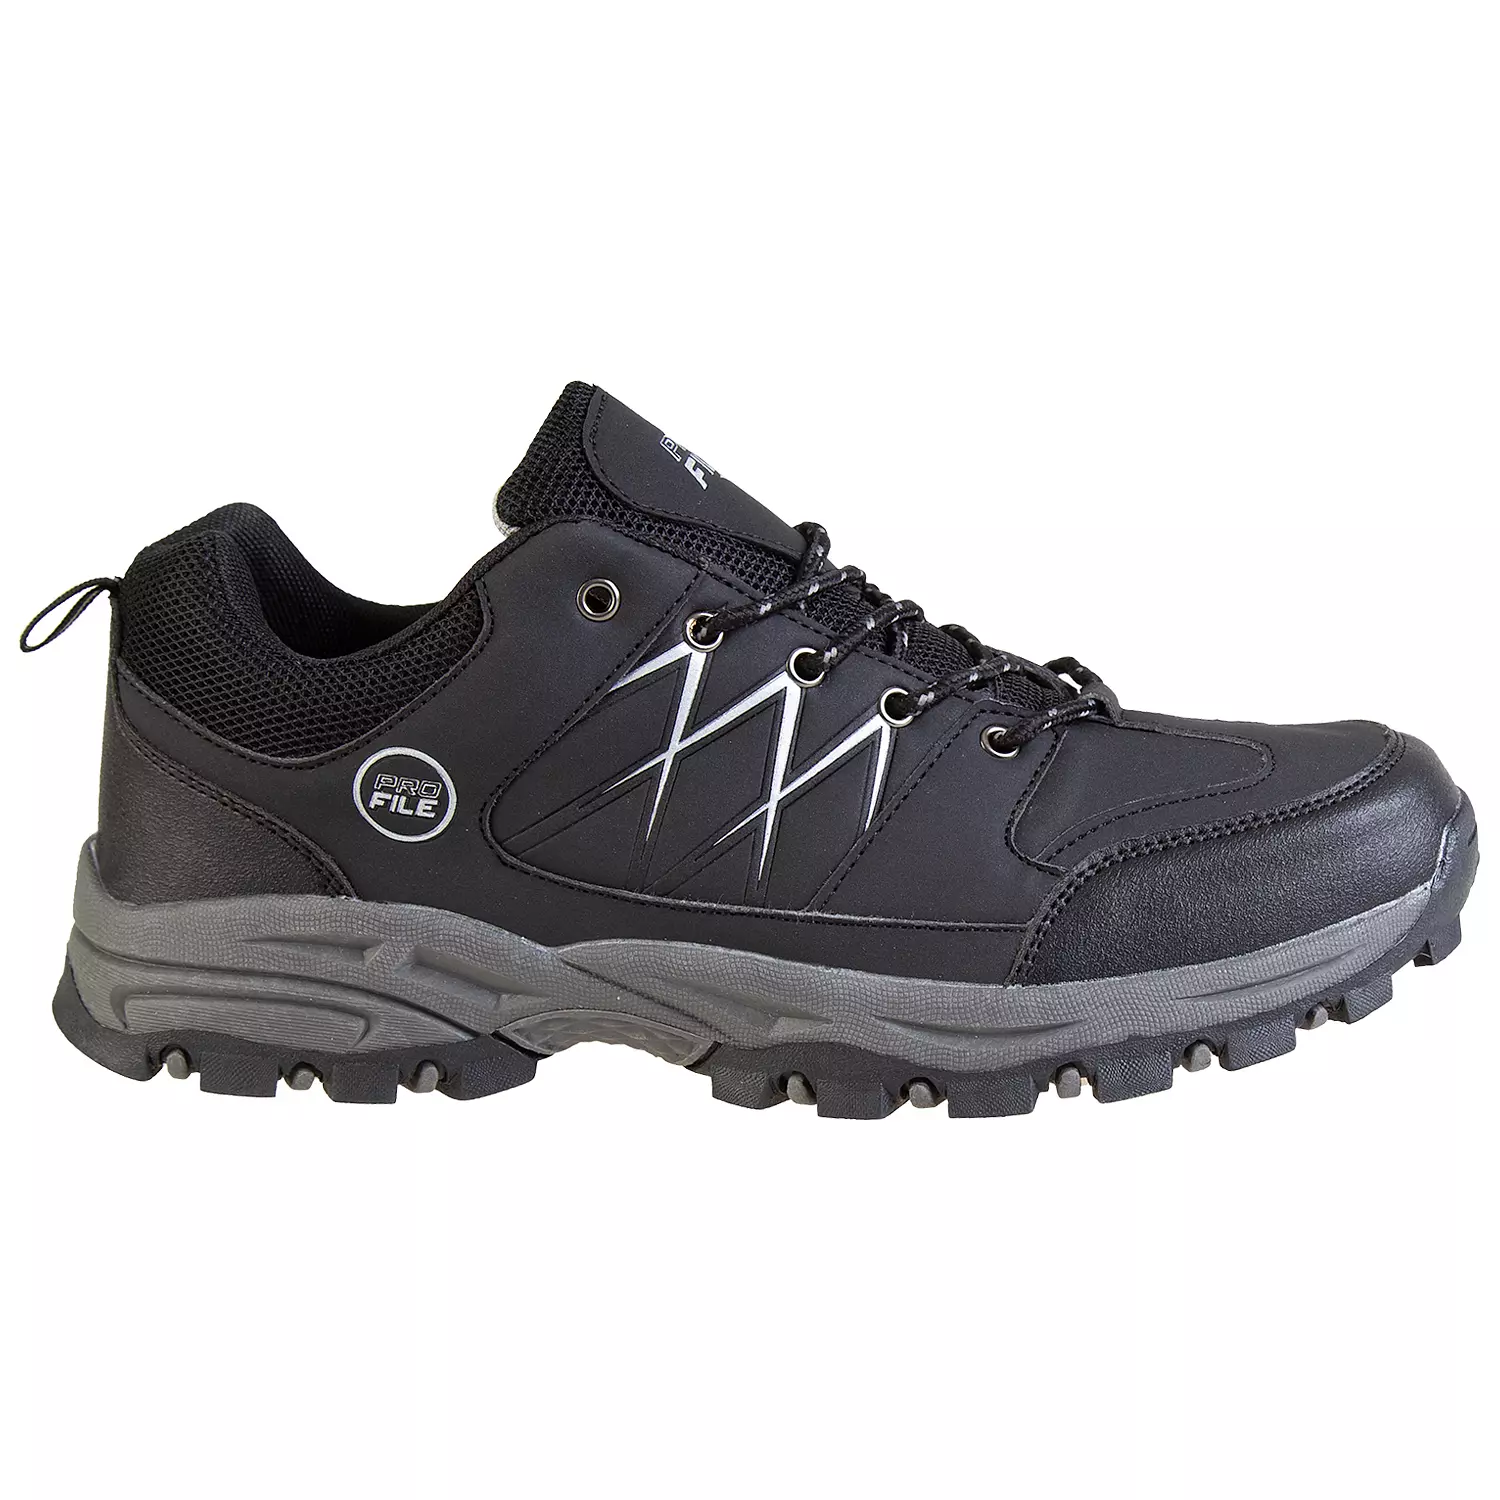 Men's low top hiking shoes with reflective strips, black, size 9